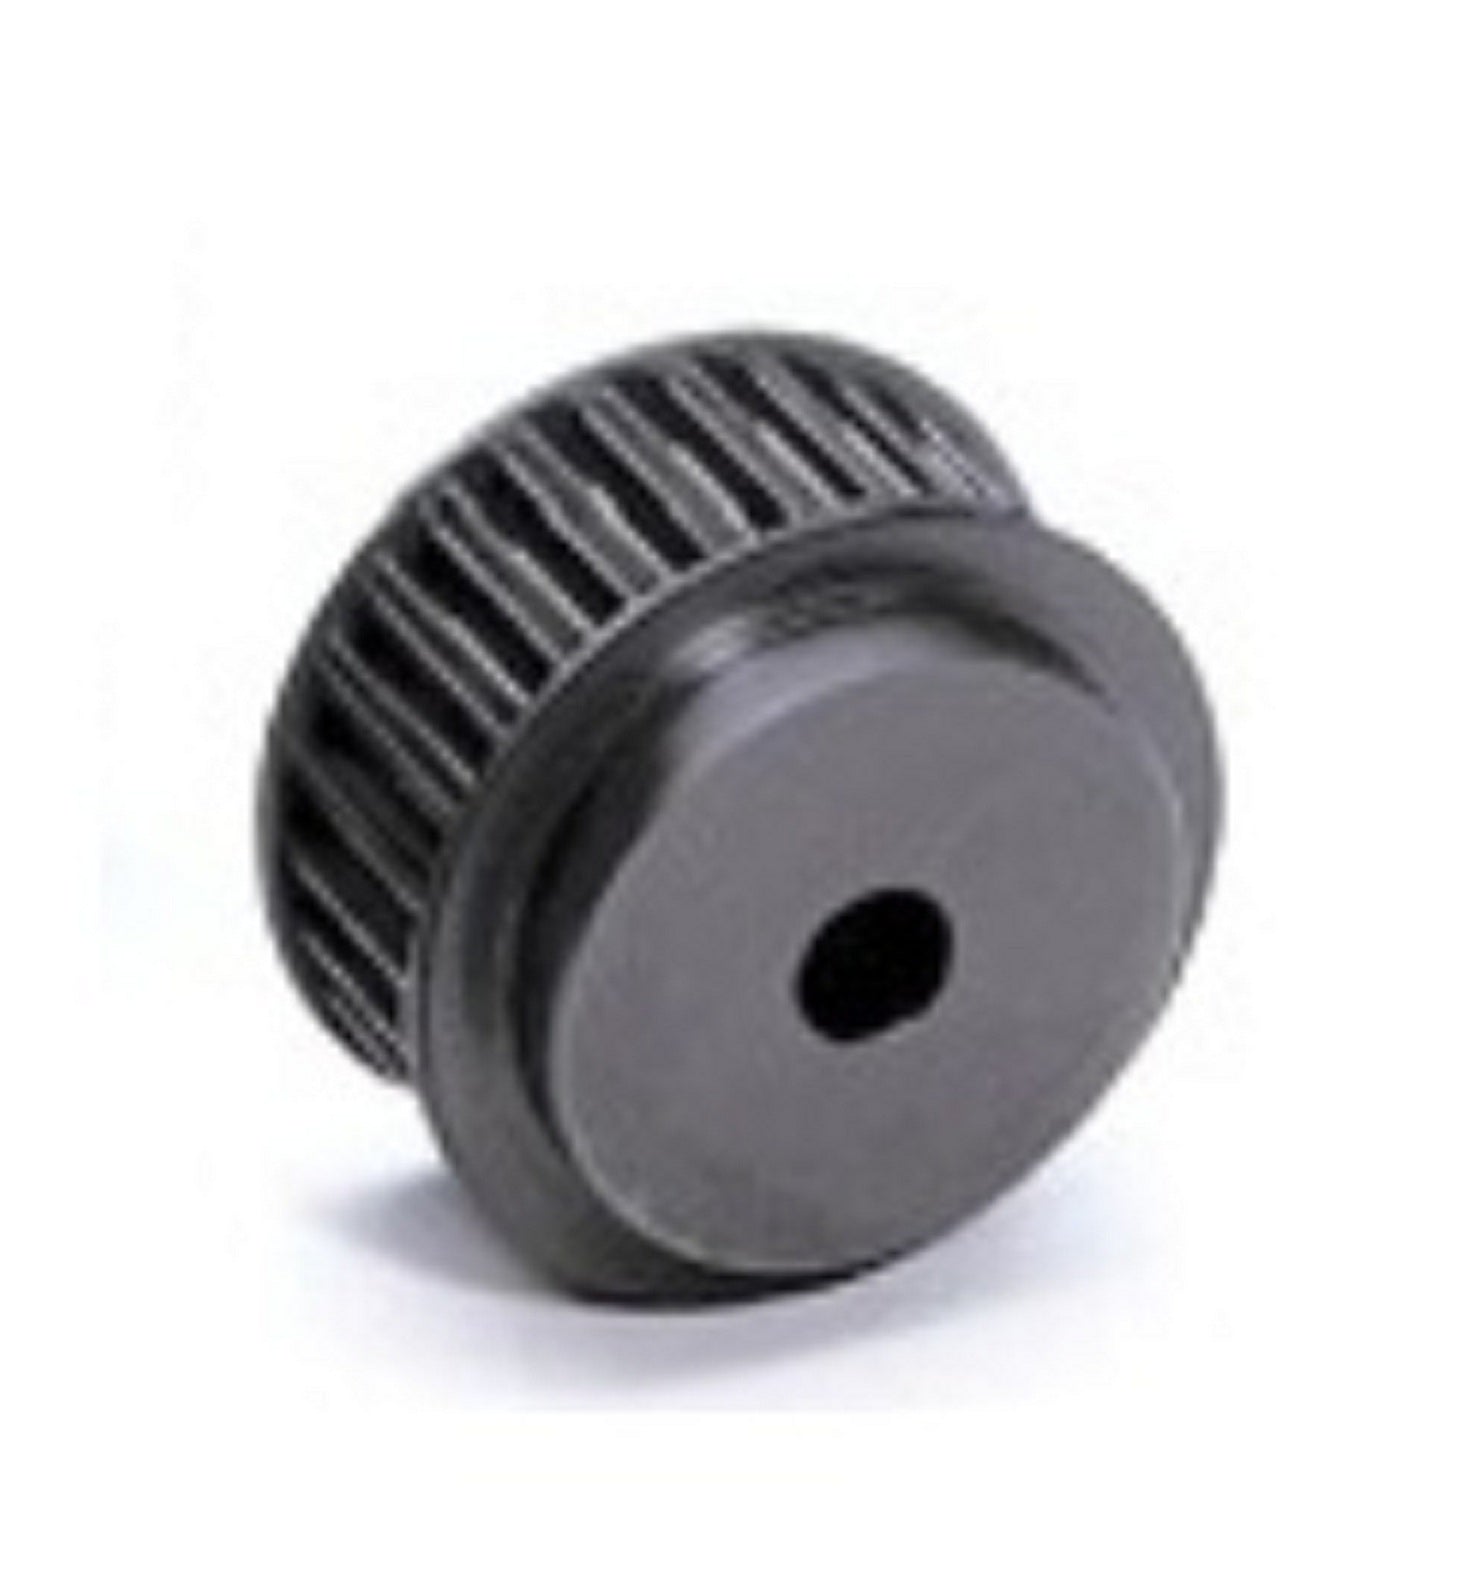 24-8M-30 Steel Pulley 24 tooth MPB